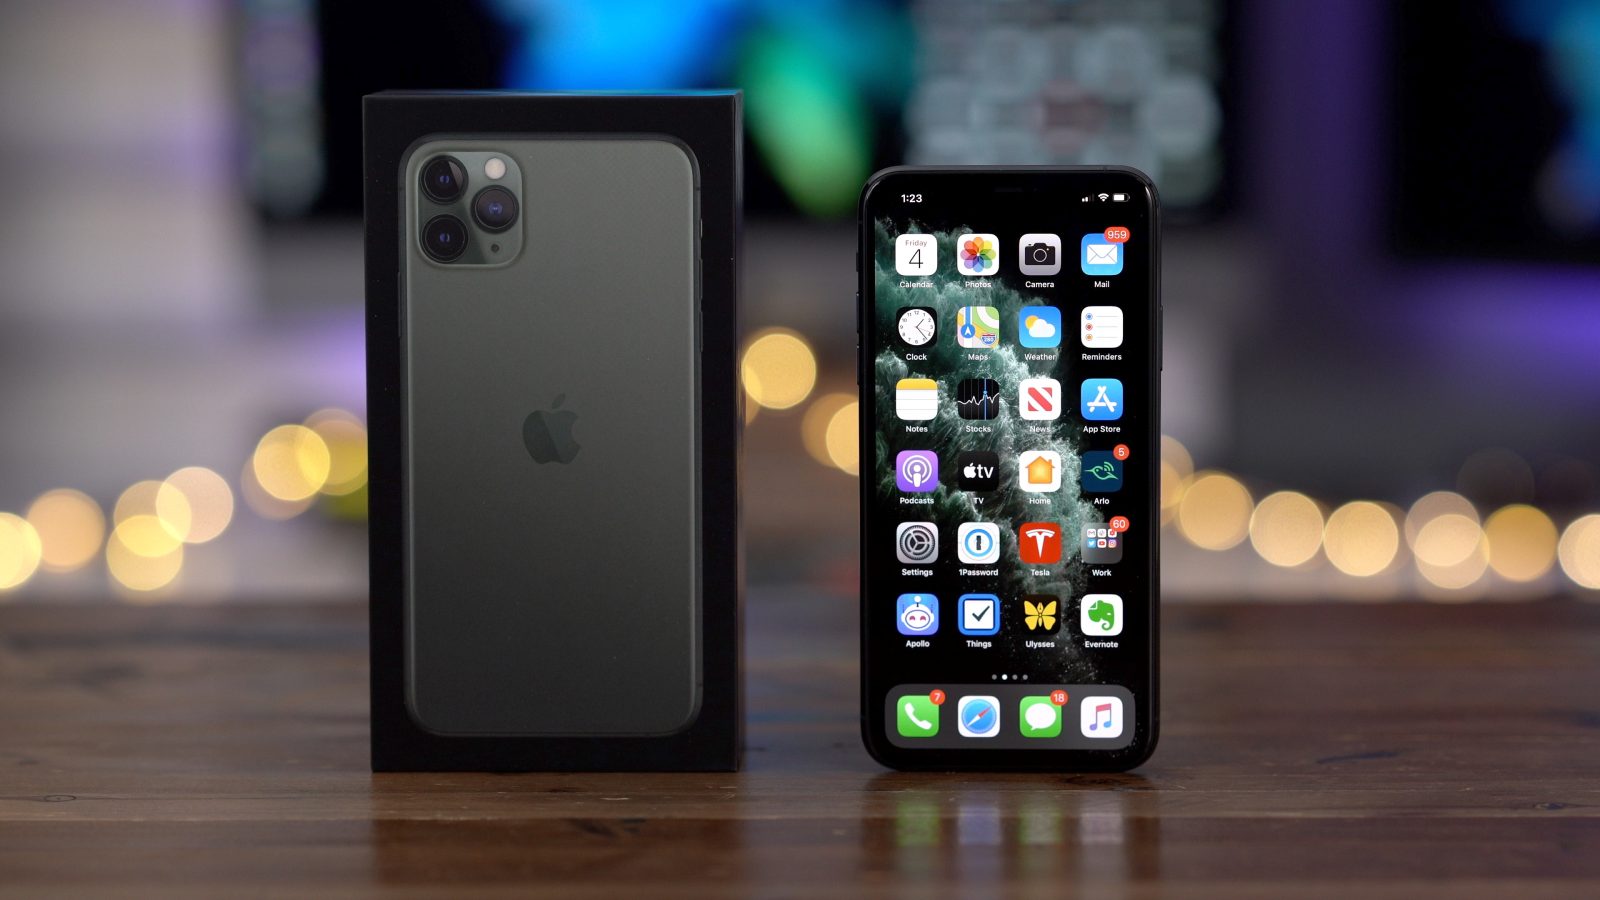 9to5Rewards: Enter to win iPhone 11 Pro Max from totallee